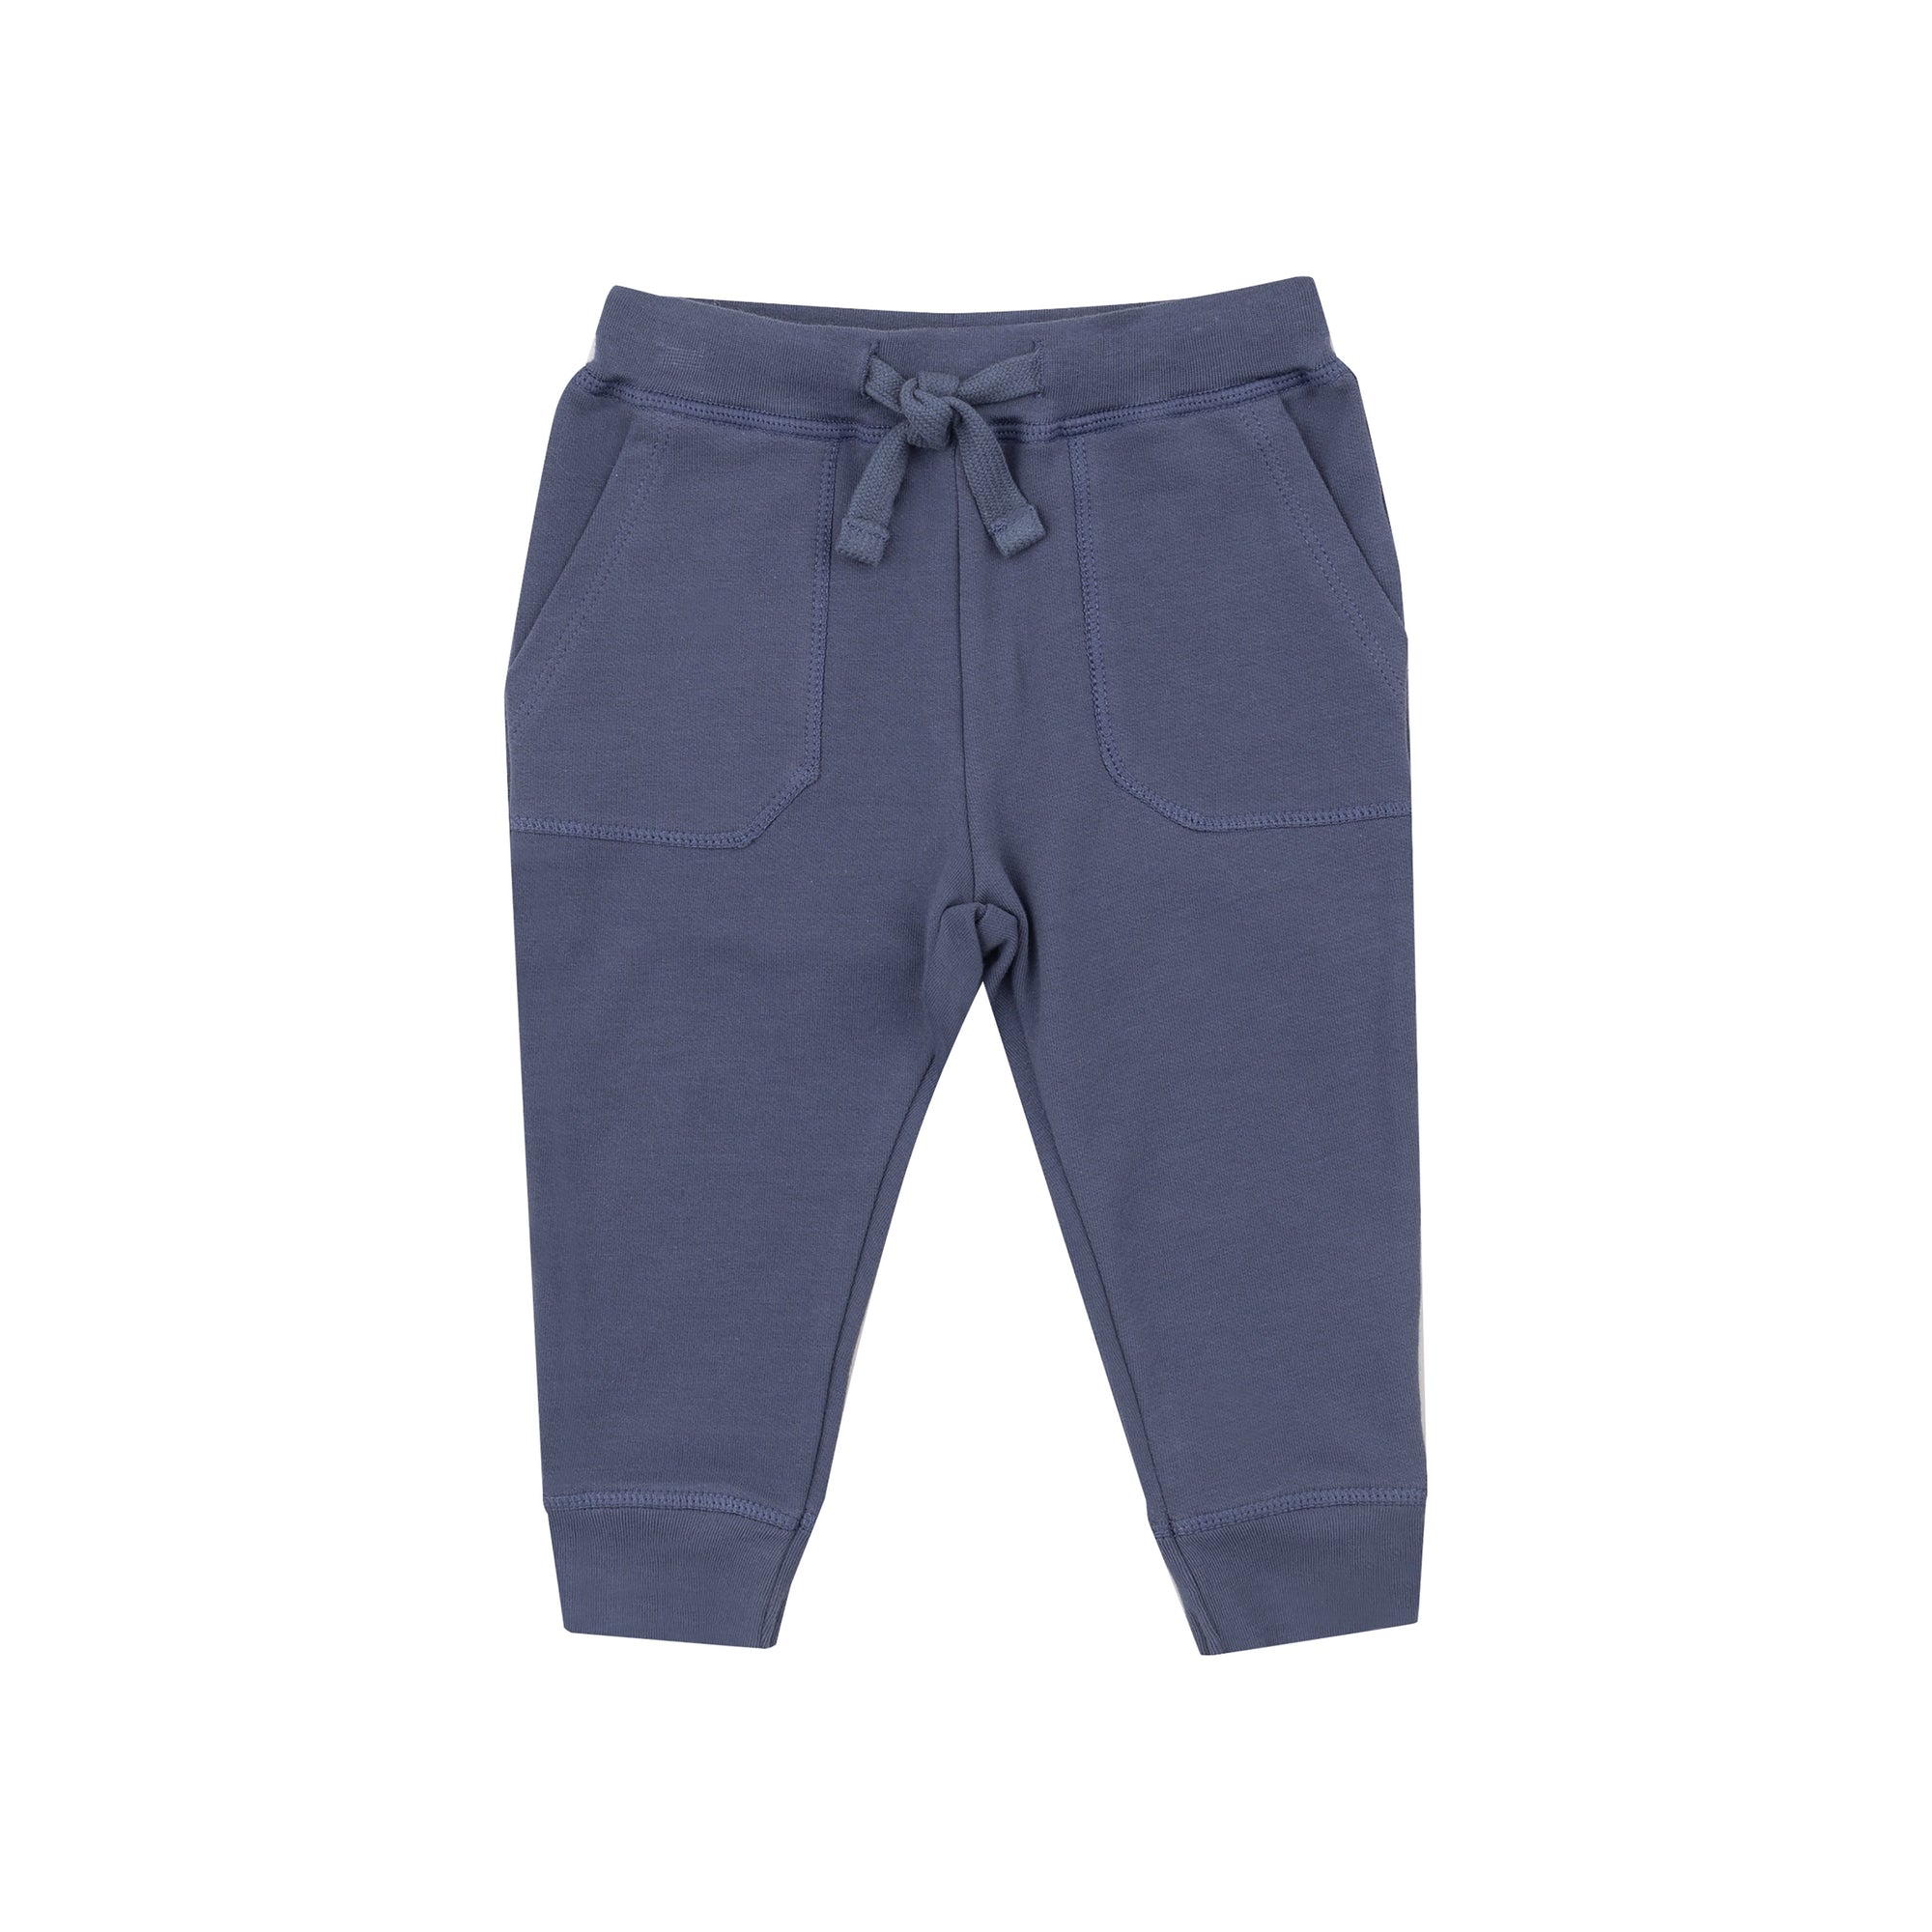 Footballs Inky Blue French Terry Jogger